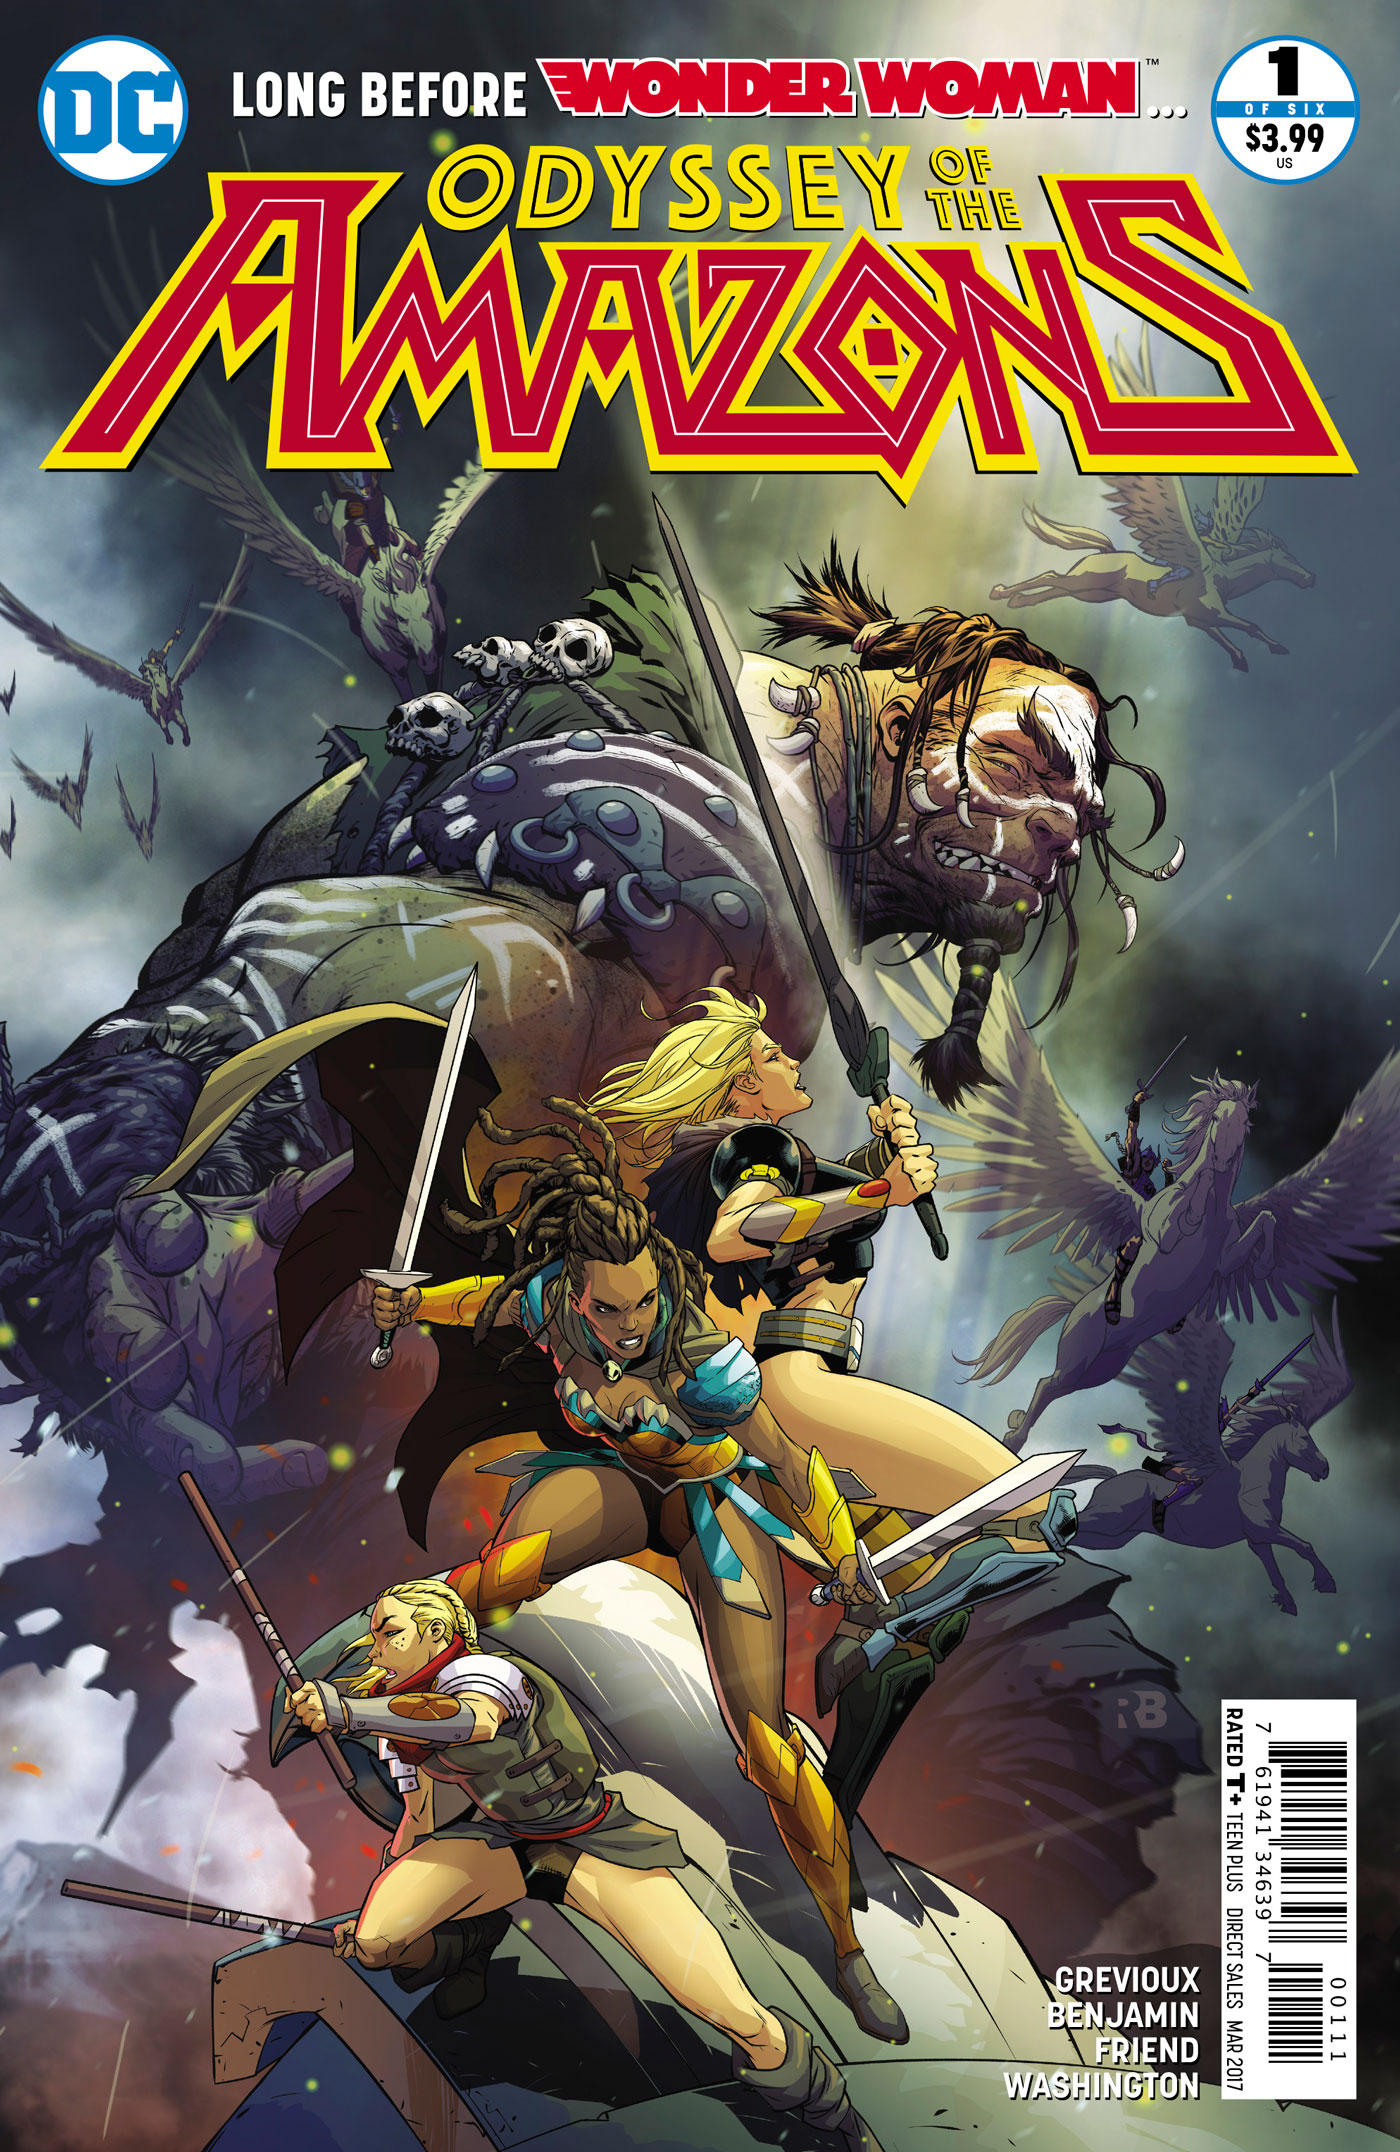 ODYSSEY OF THE AMAZONS #1 (OF 6)